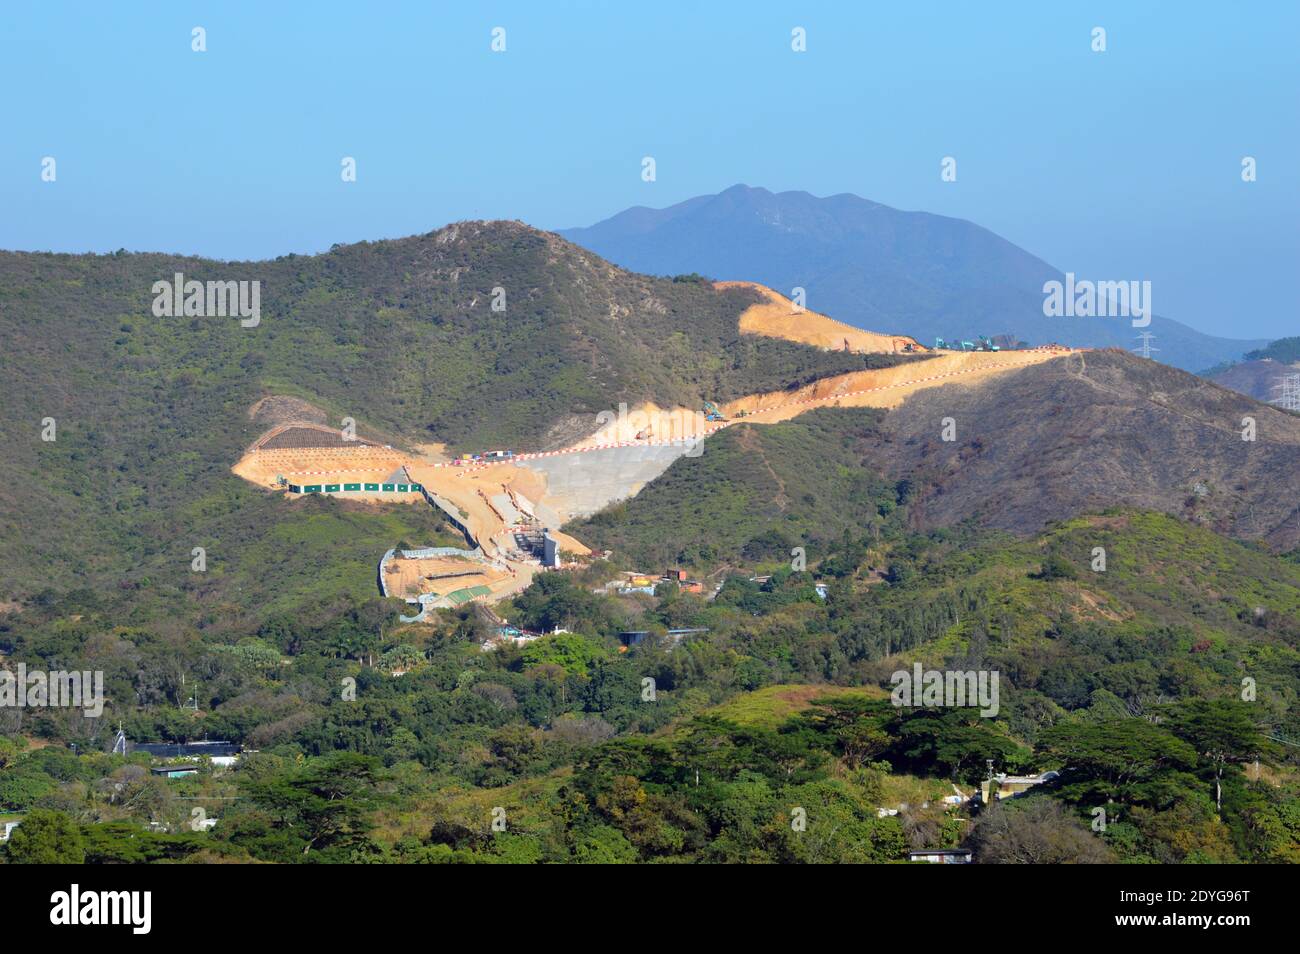 Construction on Crest Hill, Lo Wu, Hong Kong for new reservoir serving Kwu Tung North new development area Stock Photo